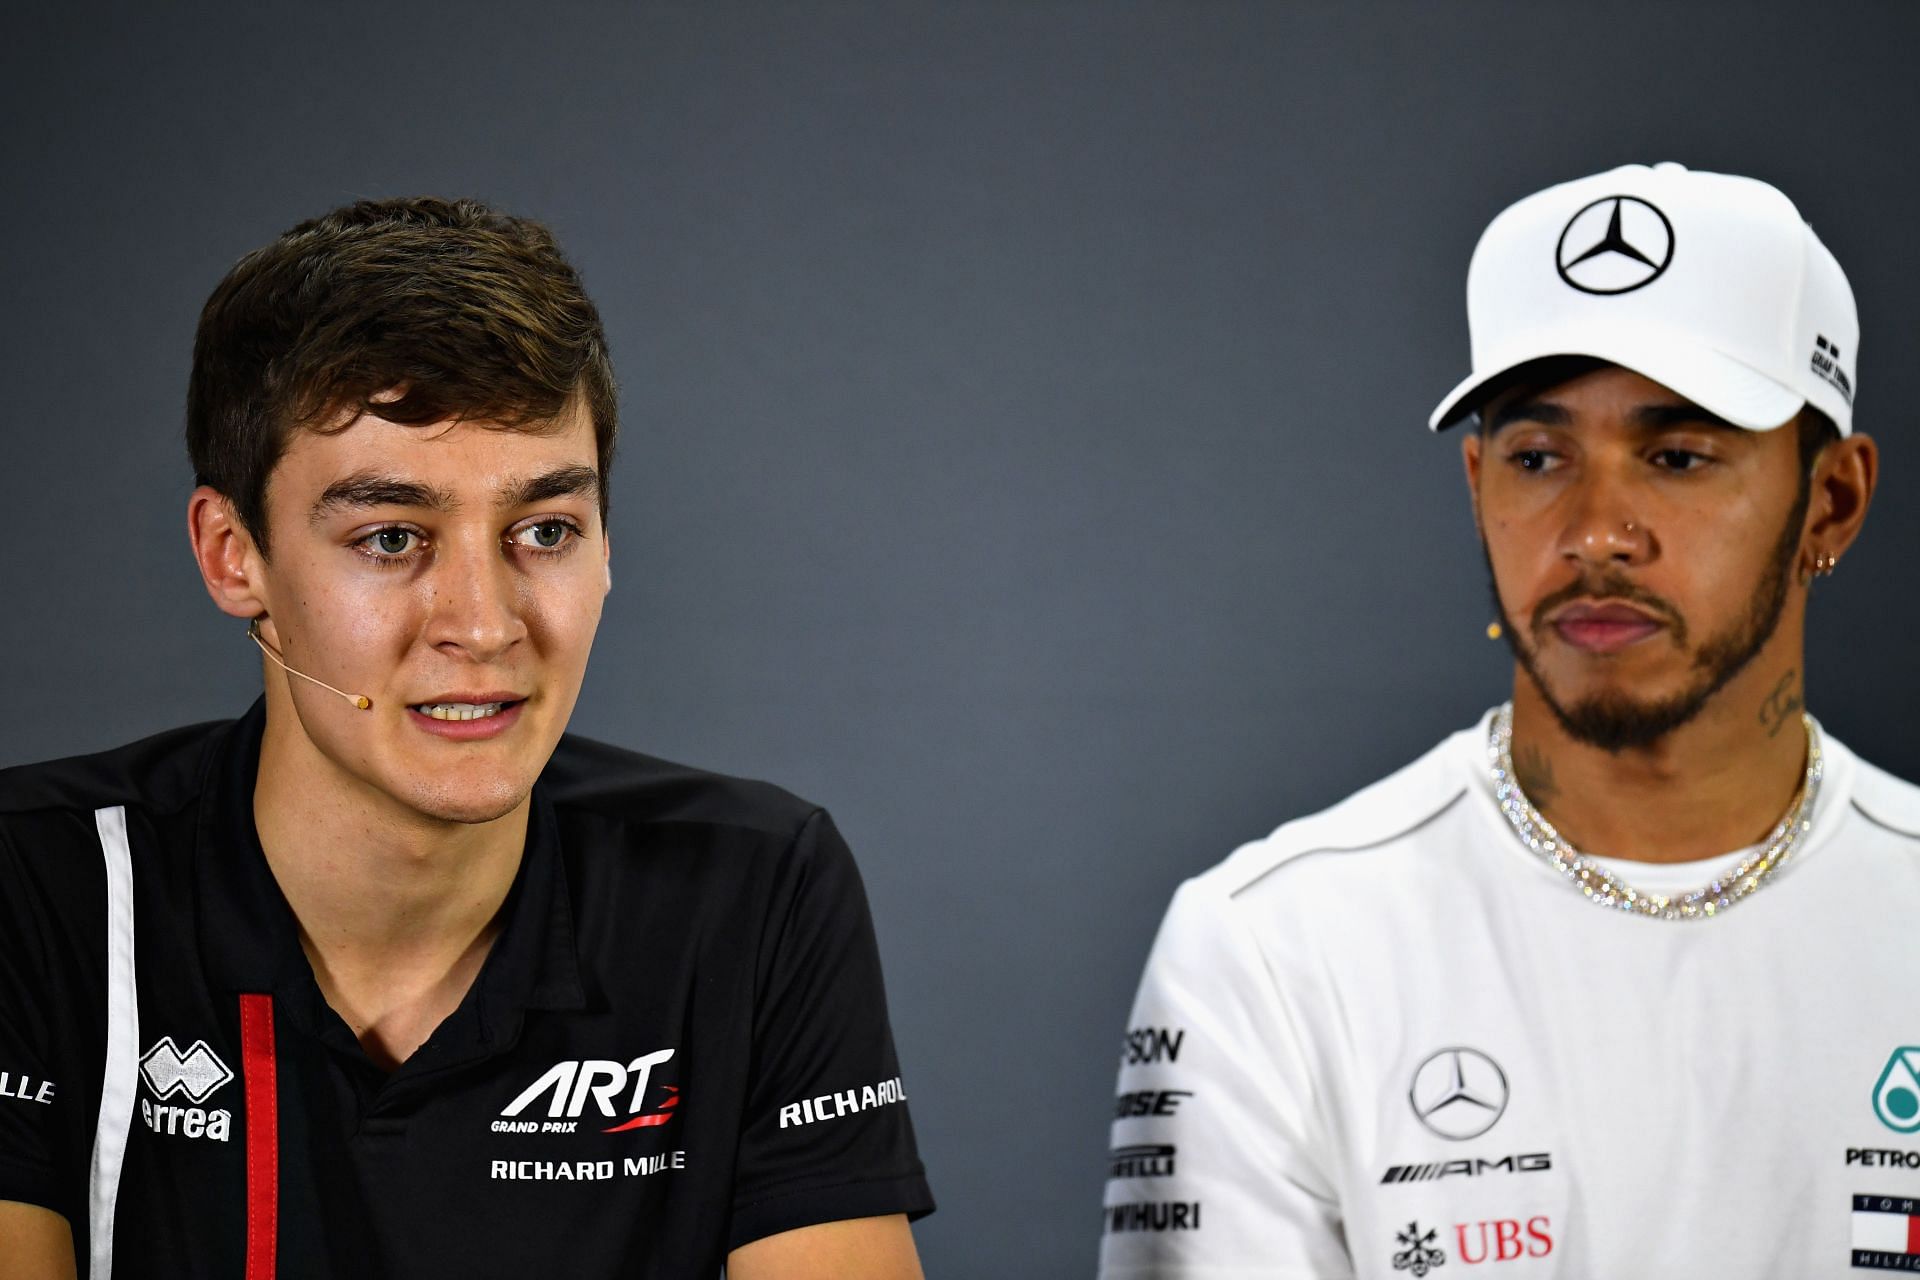 Lewis Hamilton (right) will team up with George Russell (left) for the 2022 Formula 1 season.